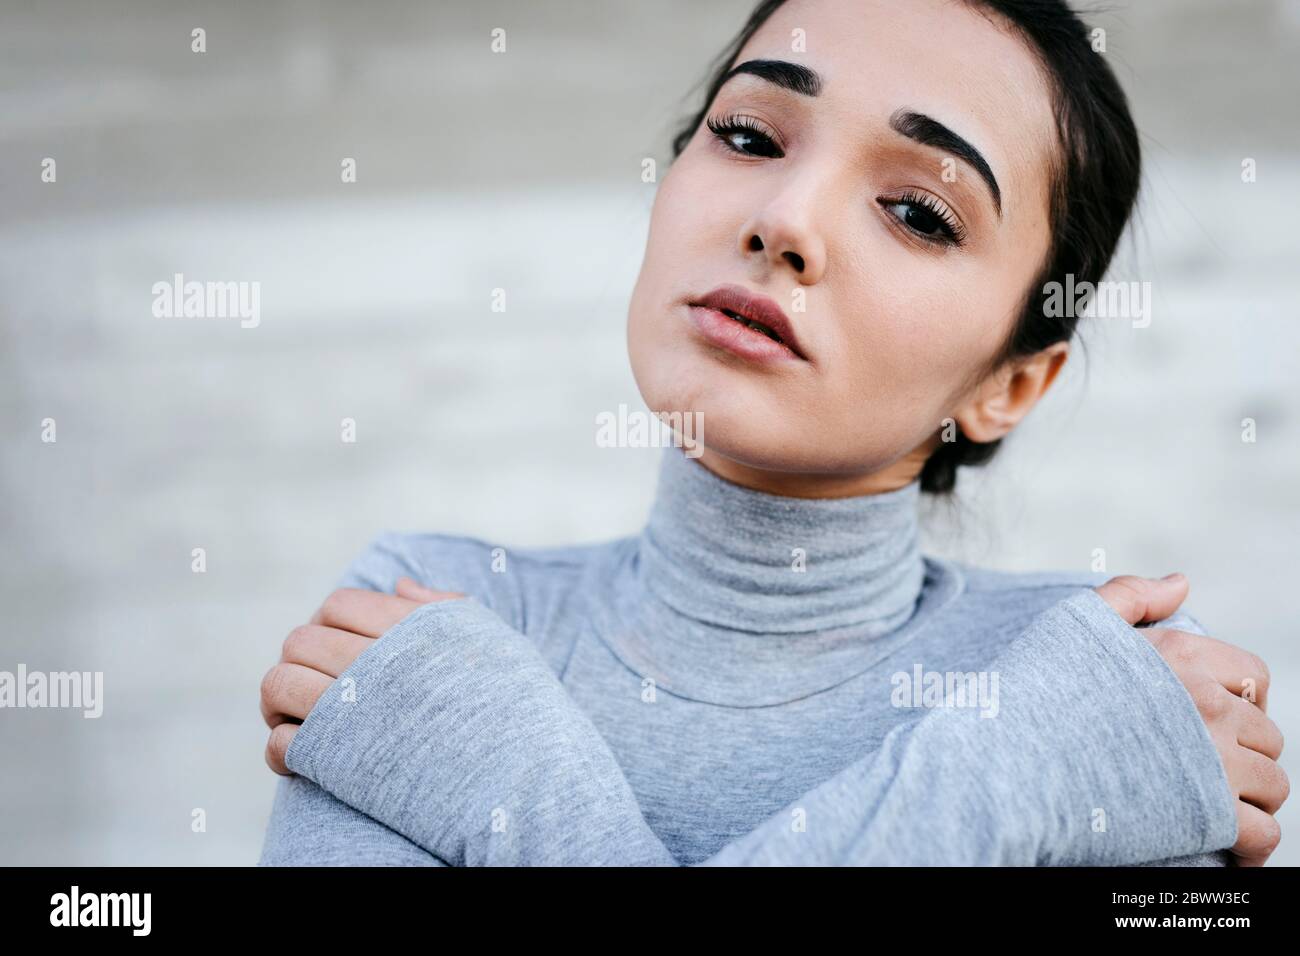 Portrait of young woman with black hair Stock Photo